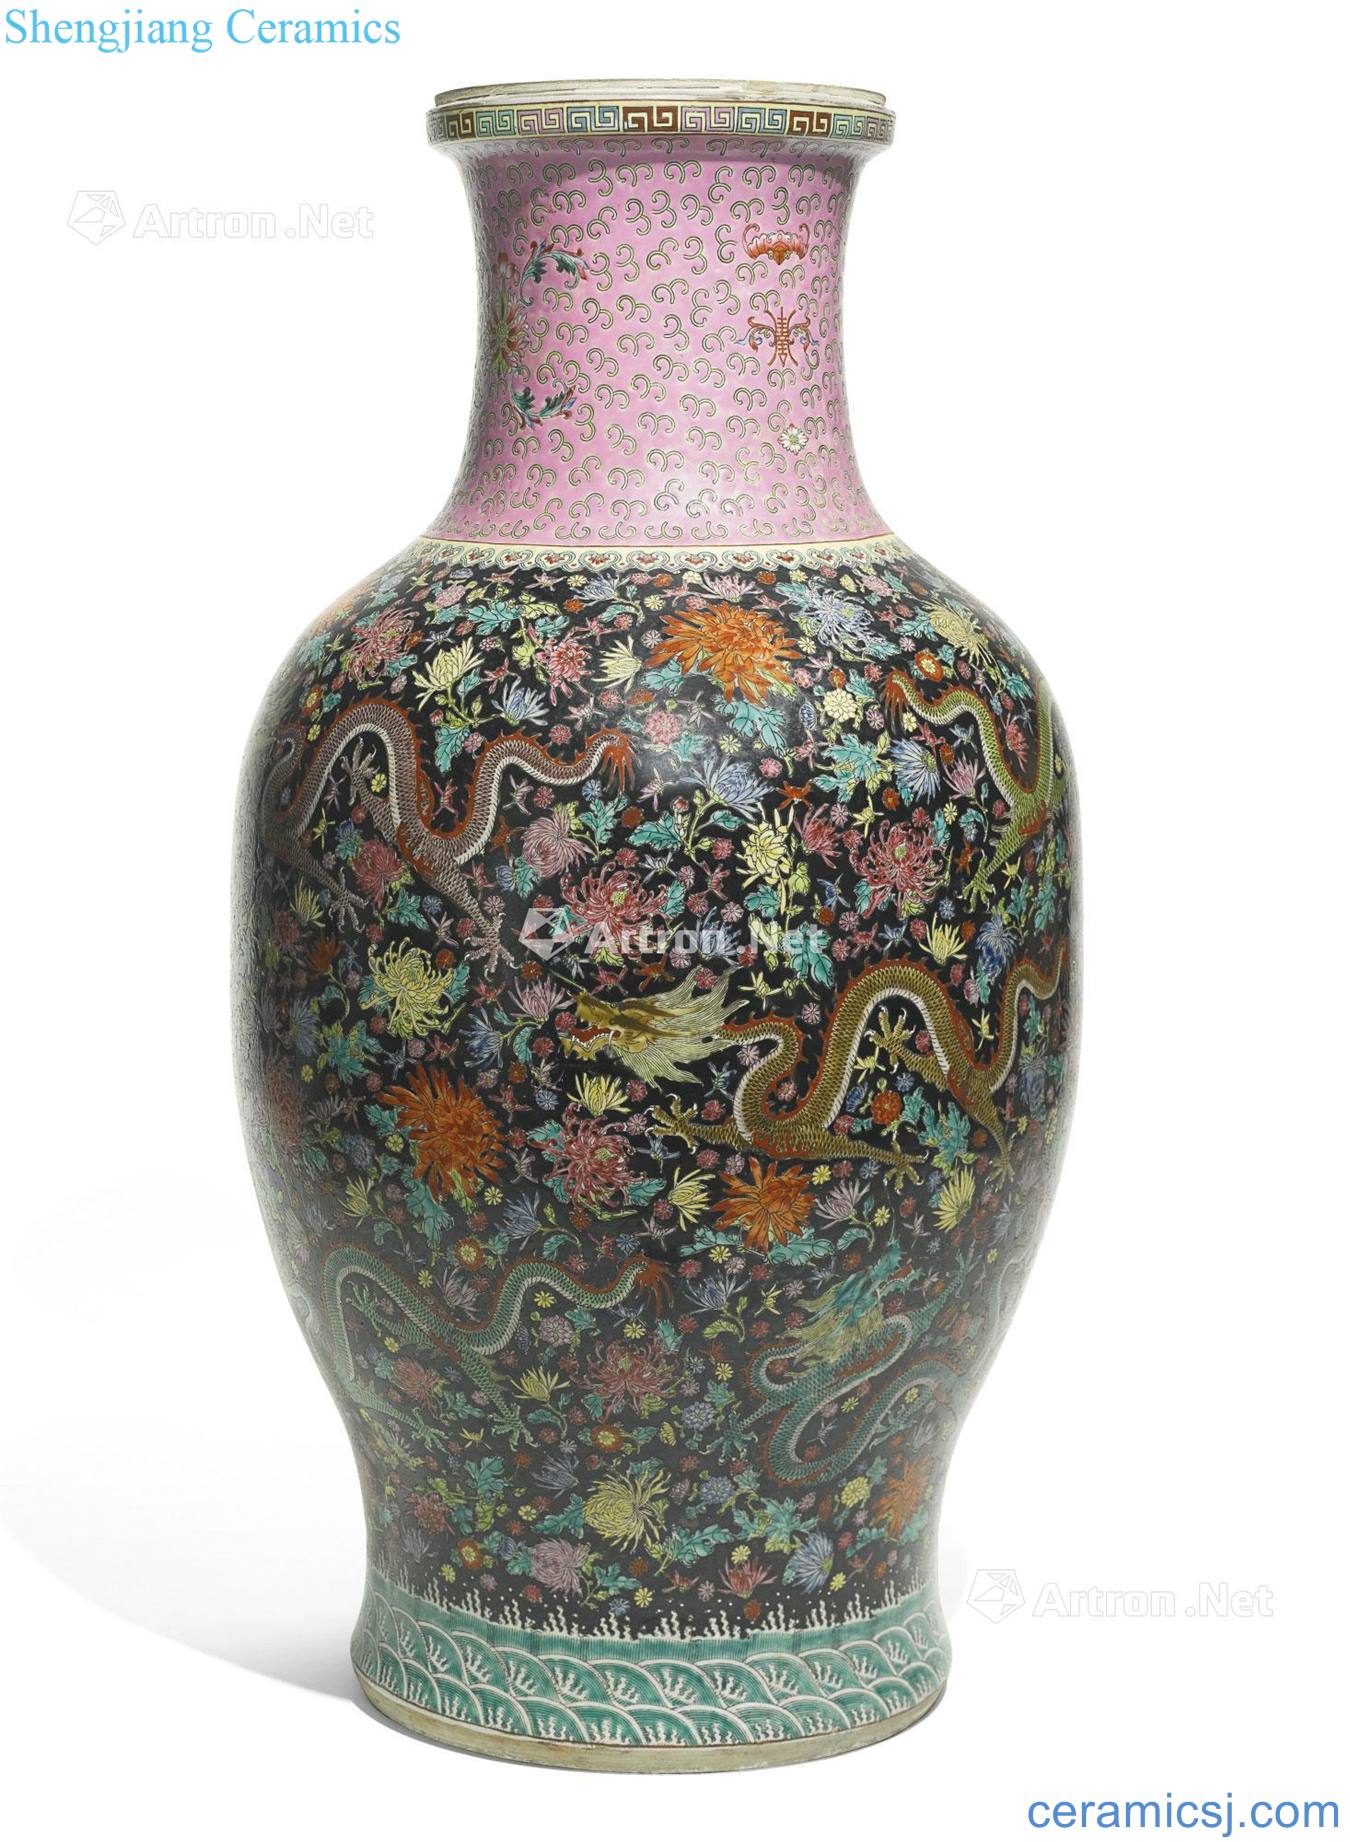 The ink to the reign of qing emperor guangxu in pastel grain big bottle, Kowloon